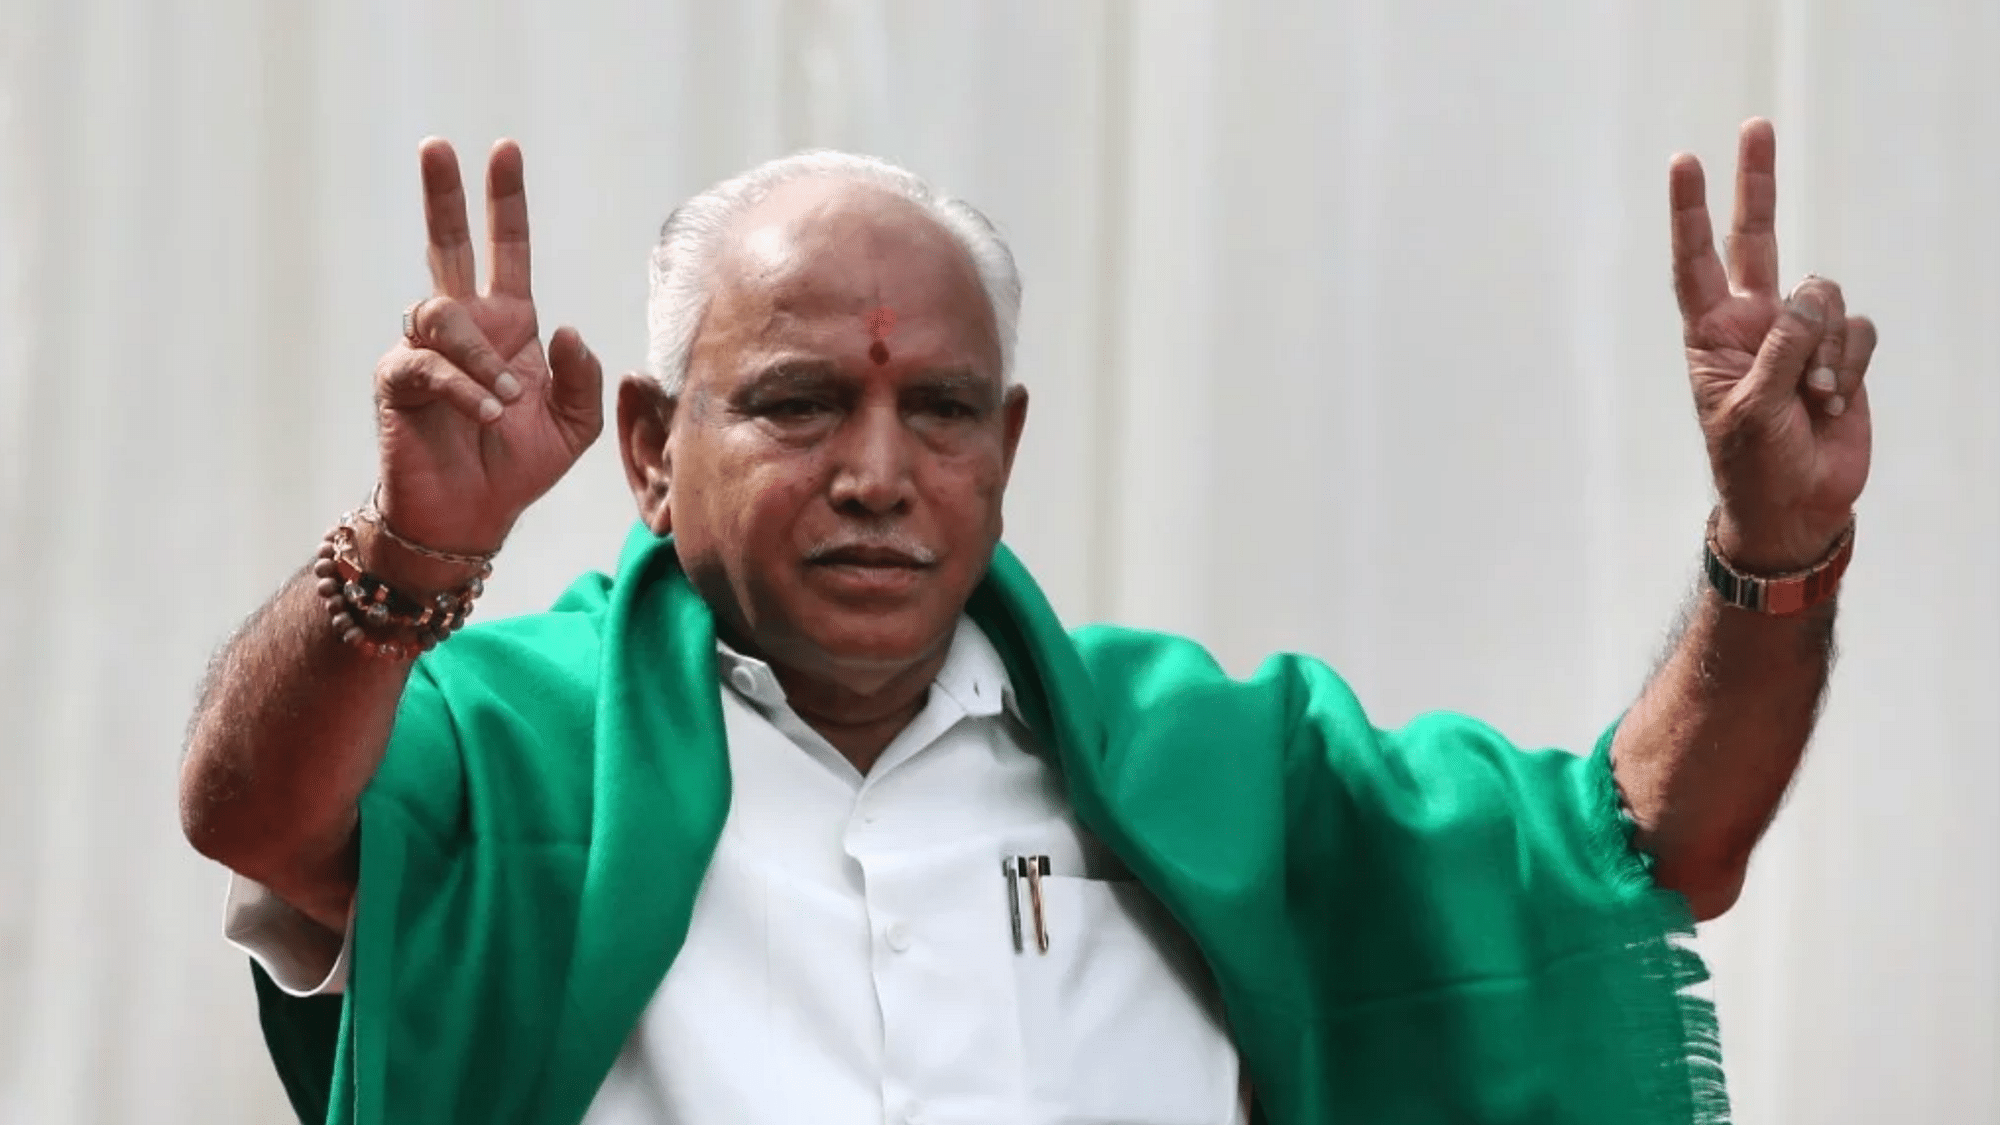 BJP’s BS Yeddyurappa flashes victory sign after he was sworn in as chief minister of Karnataka in Bangalore.